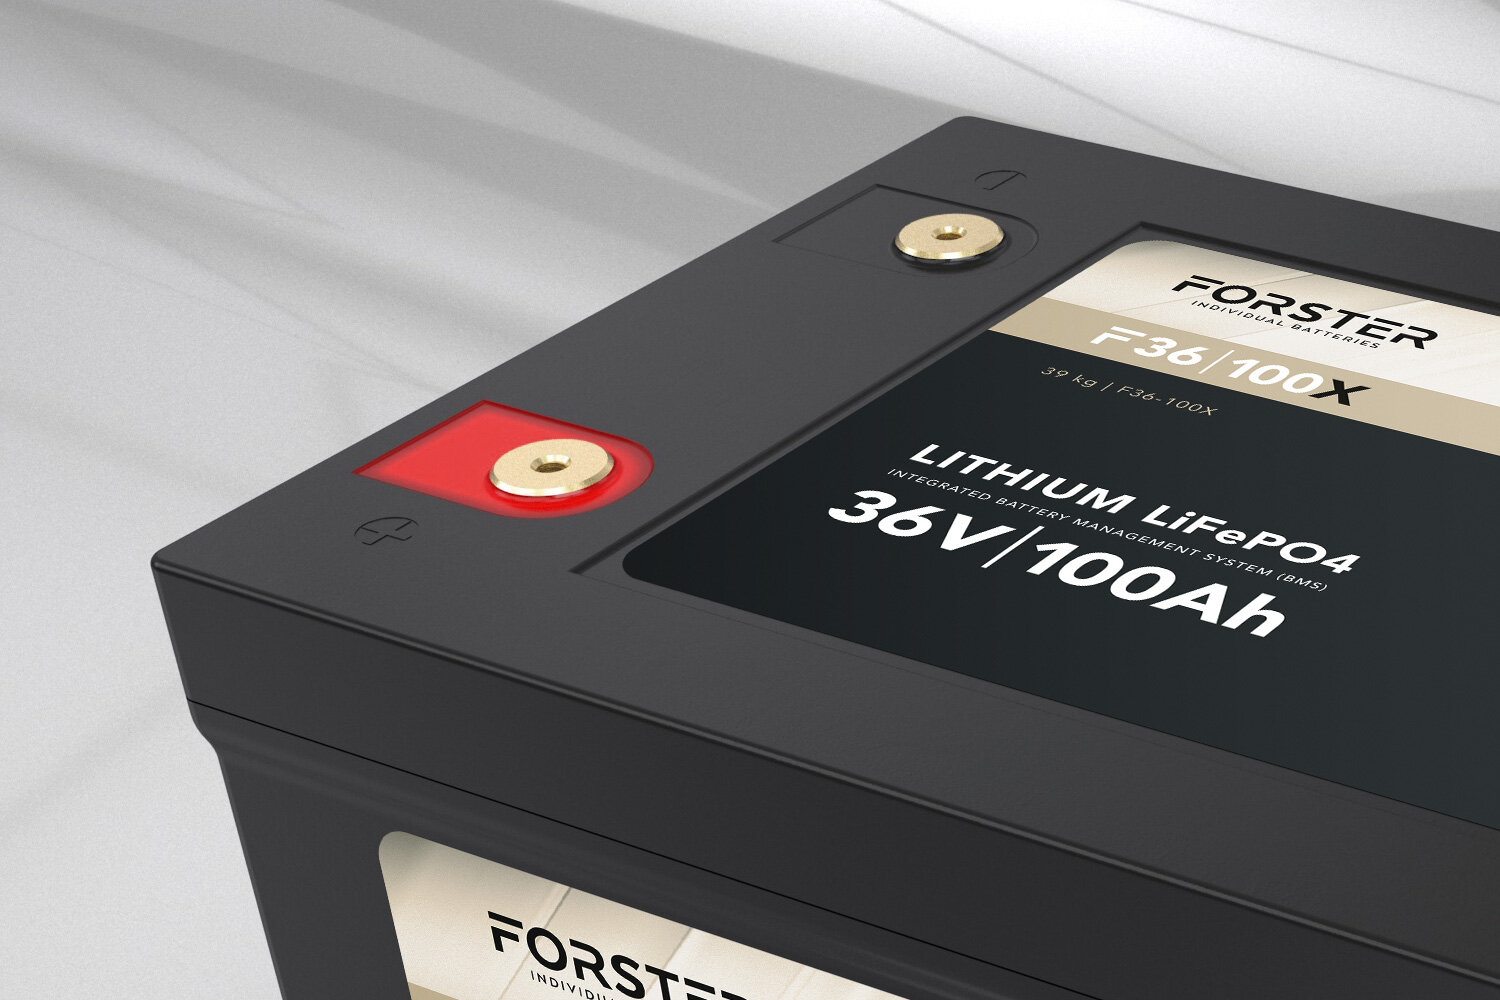 FORSTER 100Ah 38.4V Lithium LiFePO4 Premium Battery 200A-BMS-2.0 500A Bluetooth Measuring Shunt 3840Wh IP67